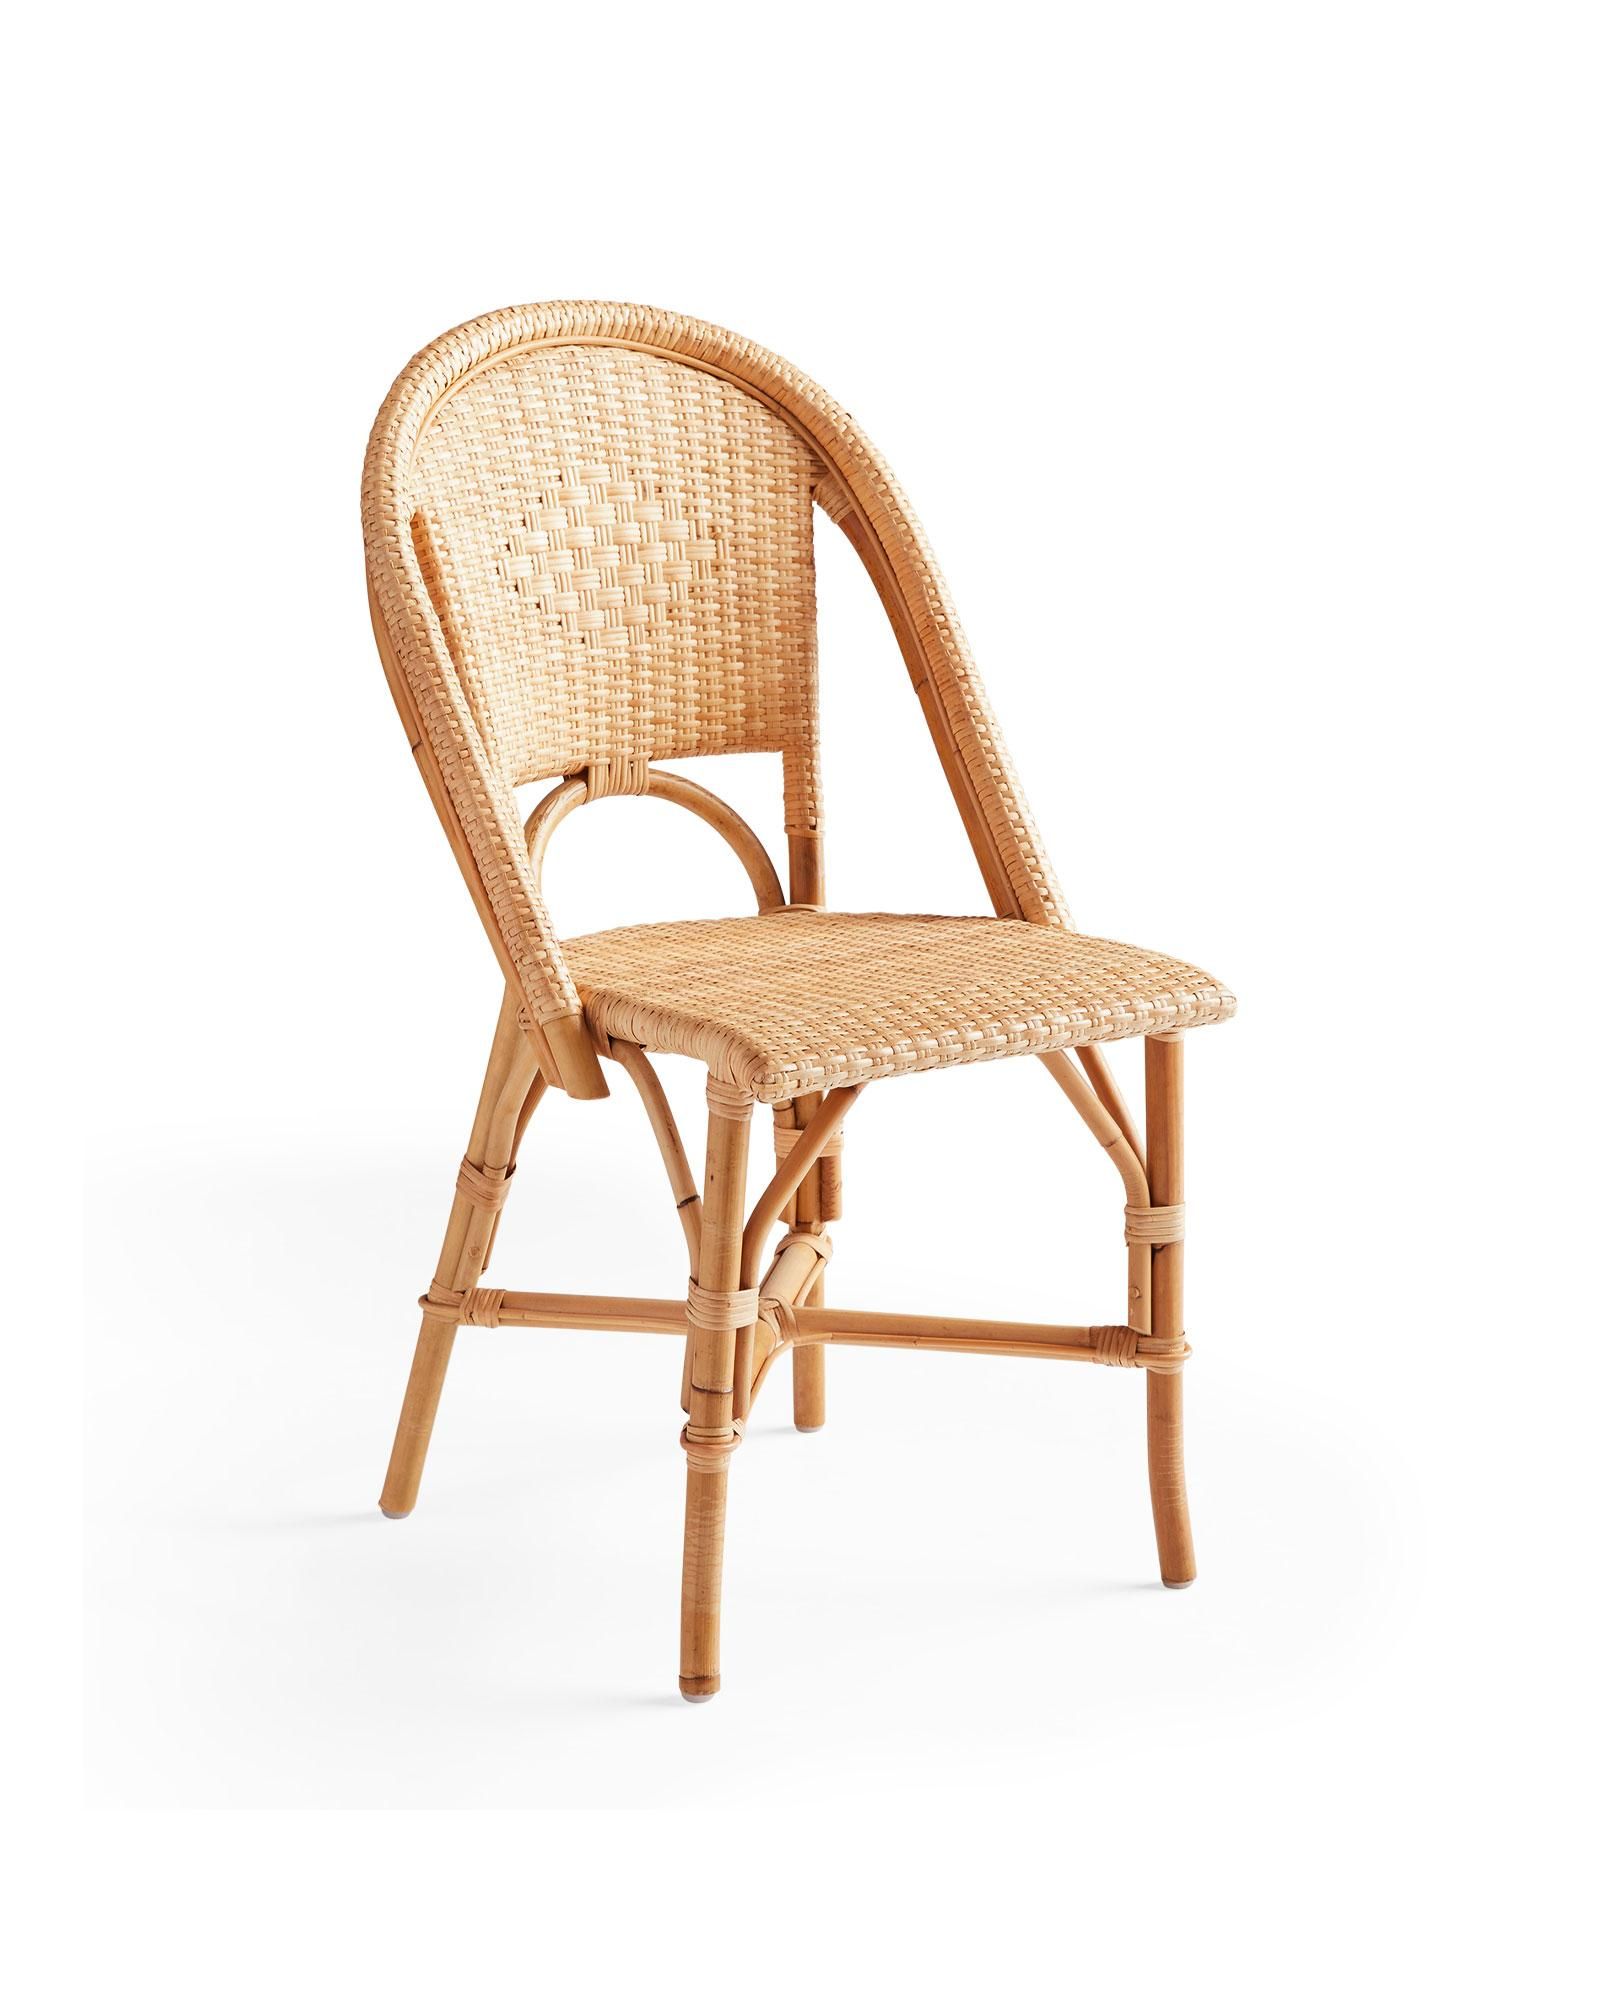 Sunwashed Riviera Rattan Dining Chair | Serena and Lily